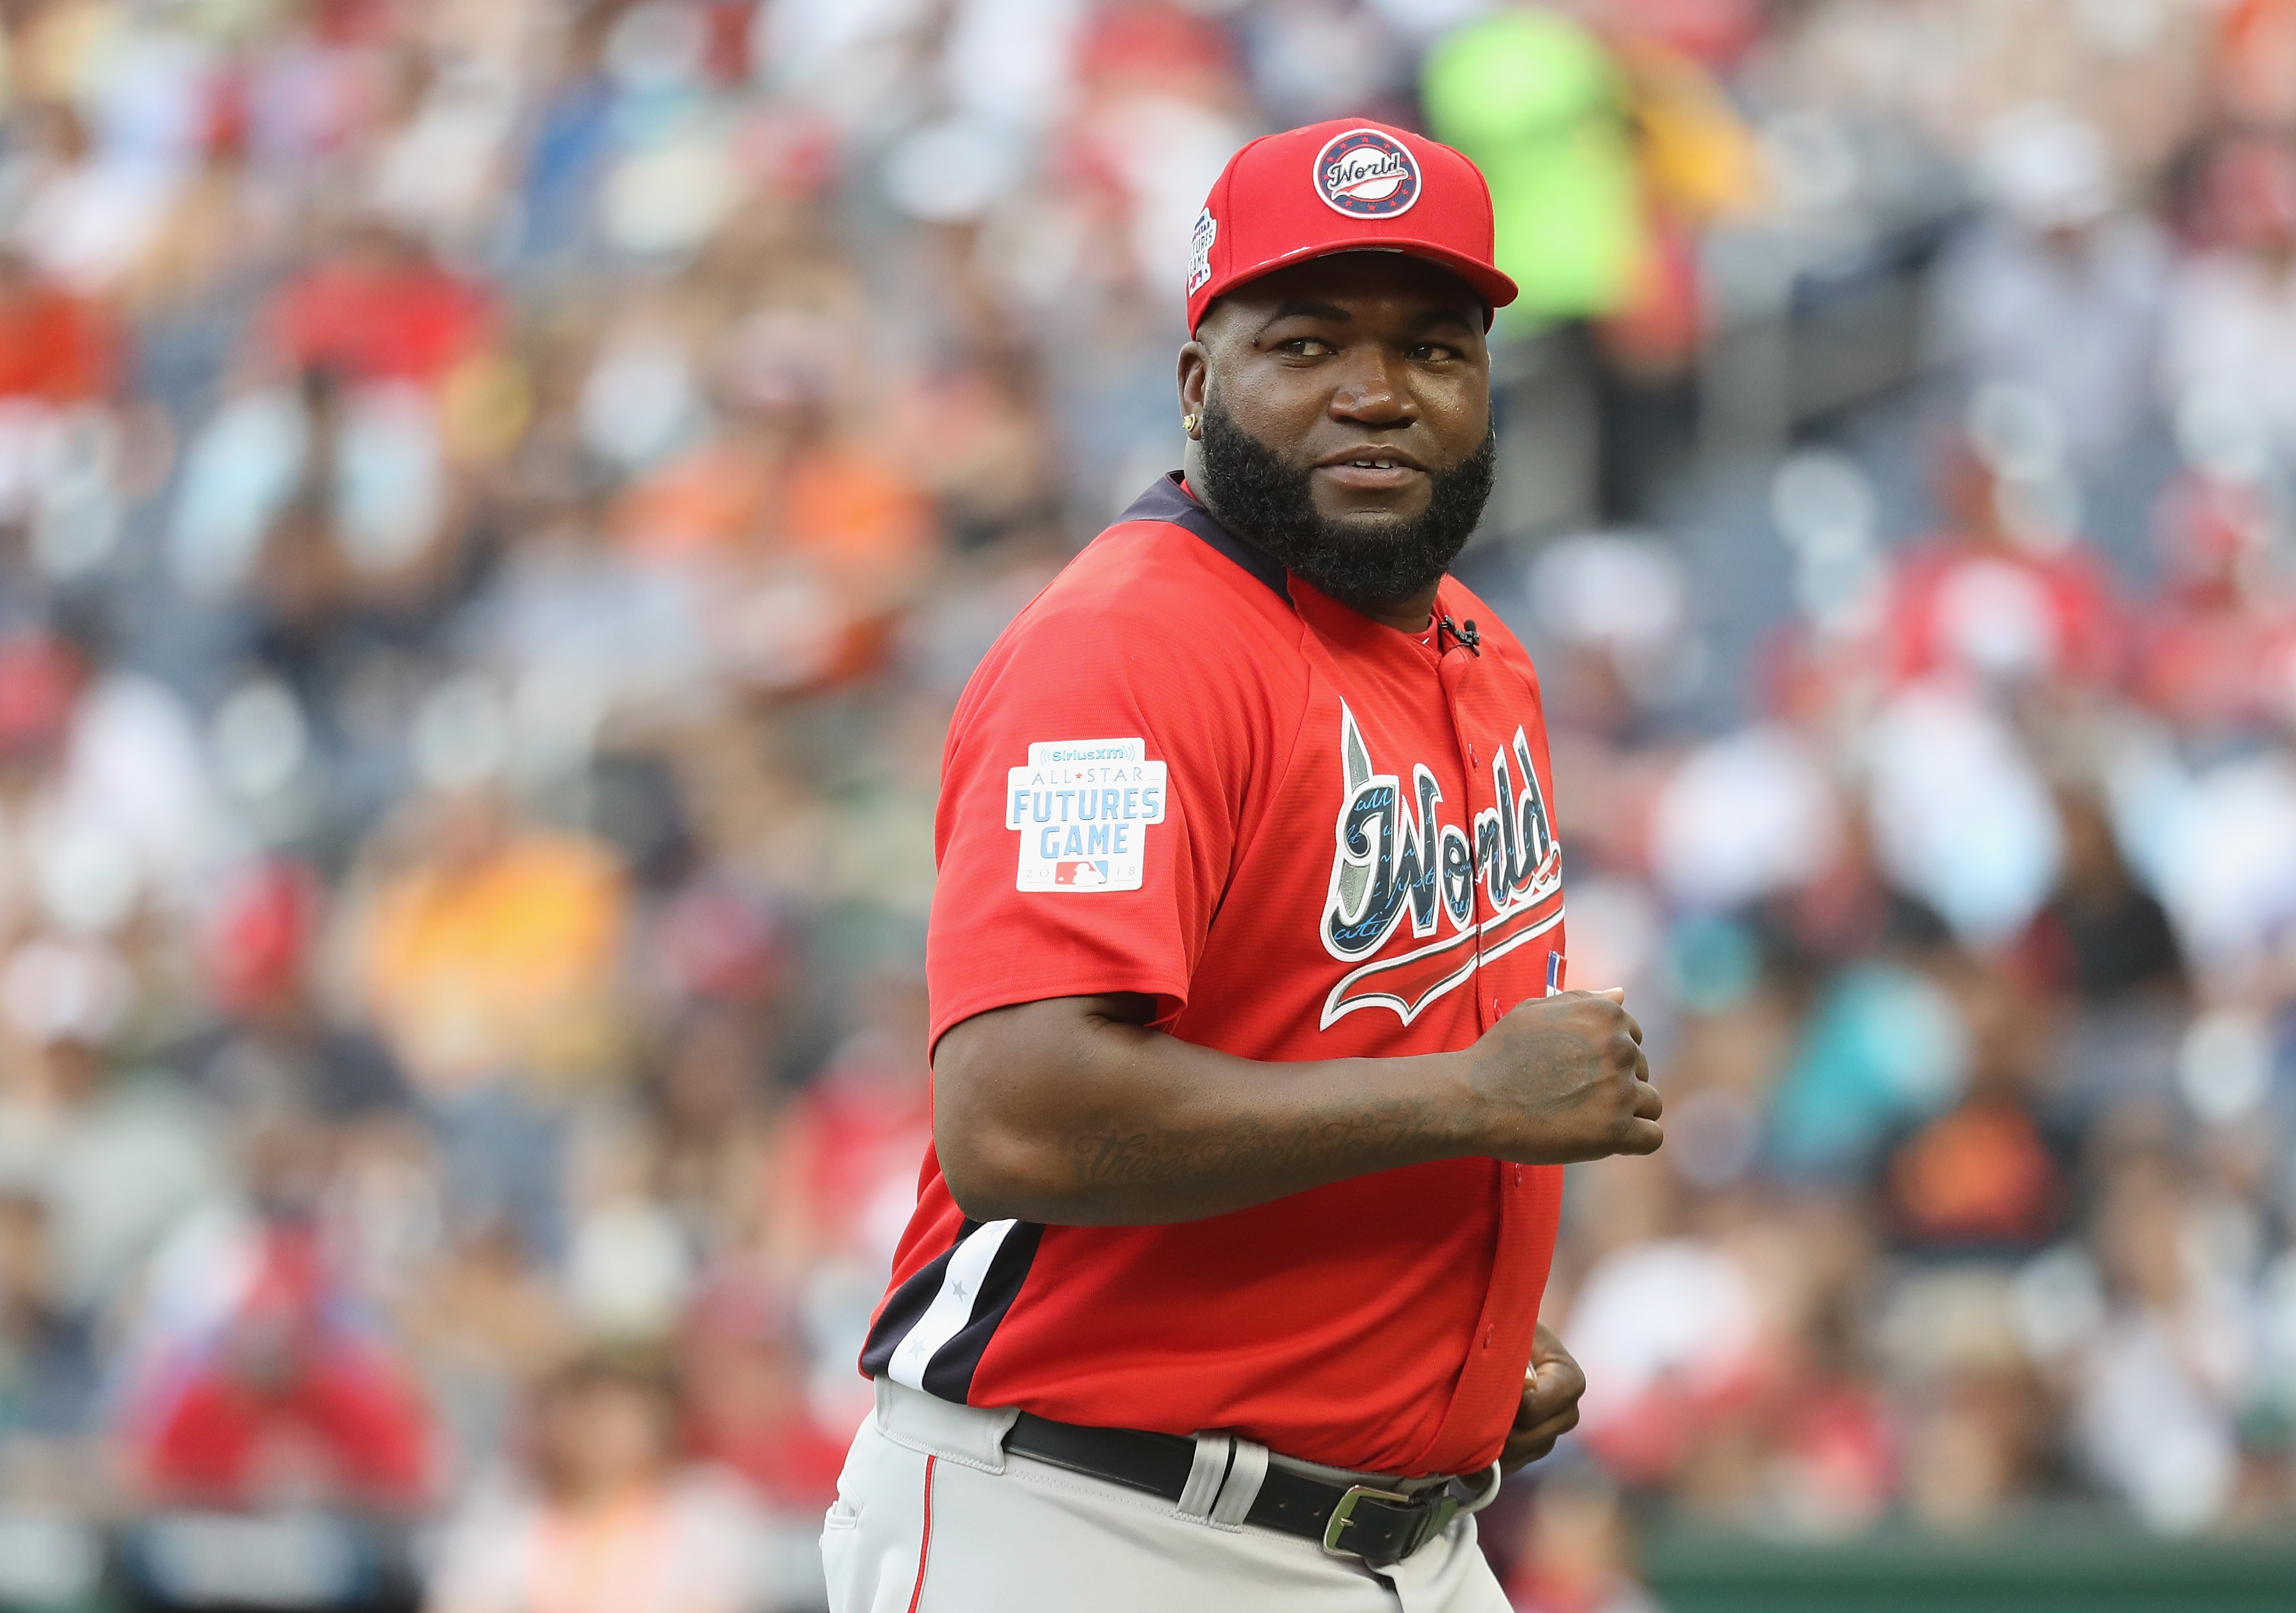 WASHINGTON, DC - JULY 15: Manager David Ortiz of the World Team looks on against the U.S. Team during the SiriusXM All-Star Futures Game at Nationals Park on July 15, 2018 in Washington, DC. (Photo by Rob Carr/Getty Images)